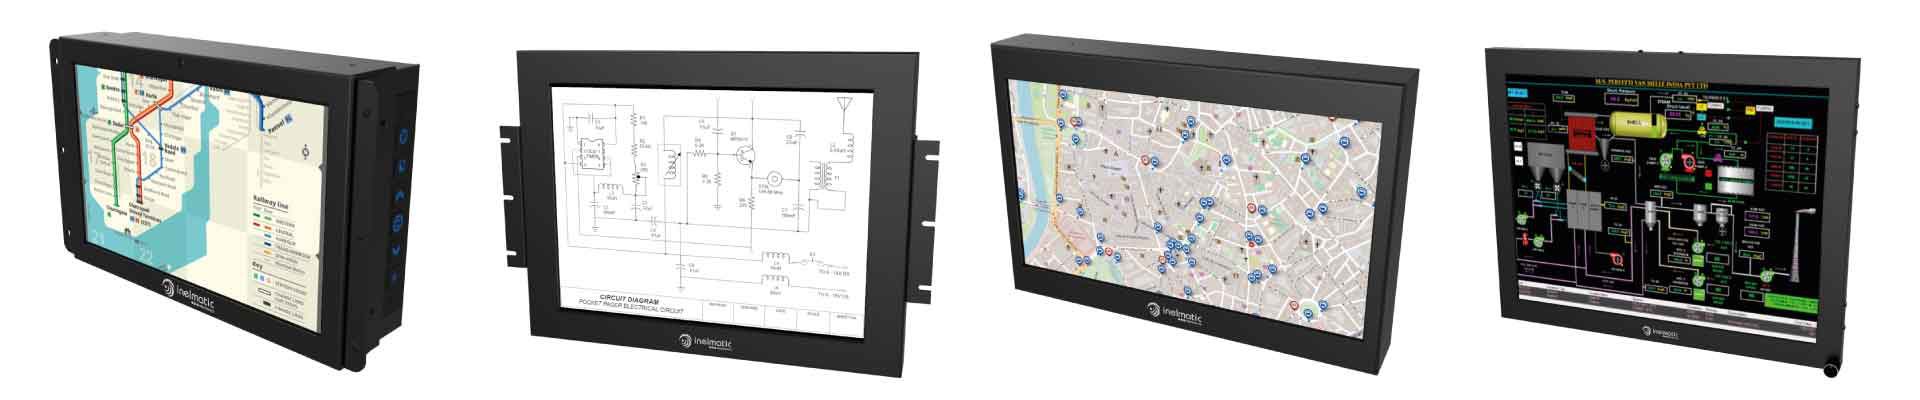 Industrial HMI displays and Panel PC - Inelmatic